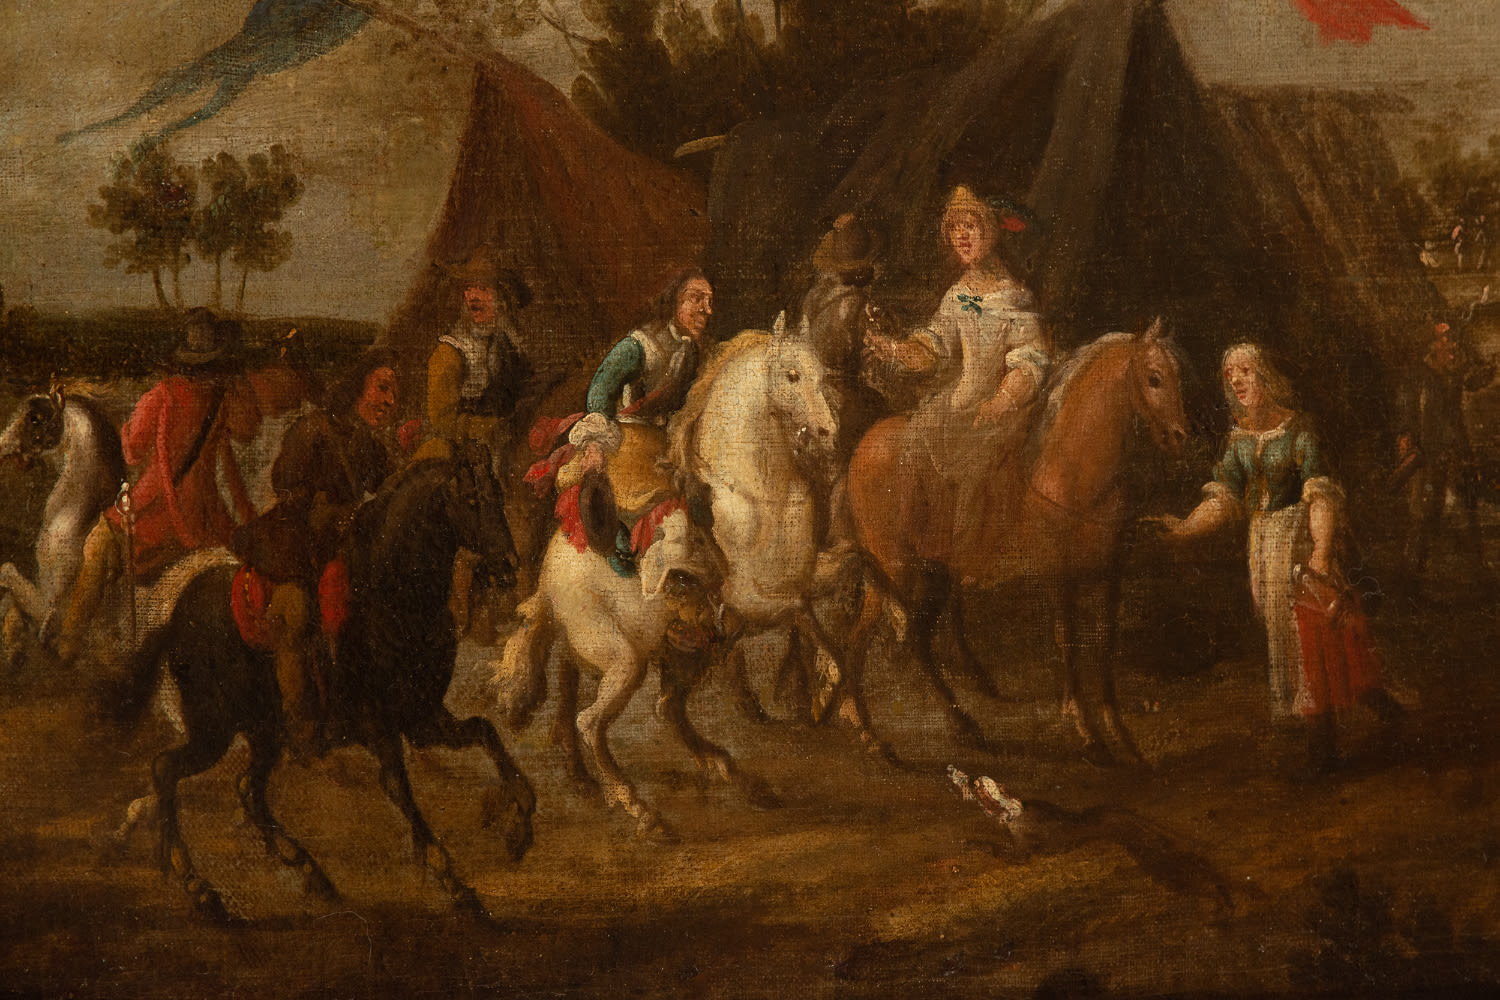 Cavalry scene, Dutch school from the second half of the 17th century - Image 6 of 12